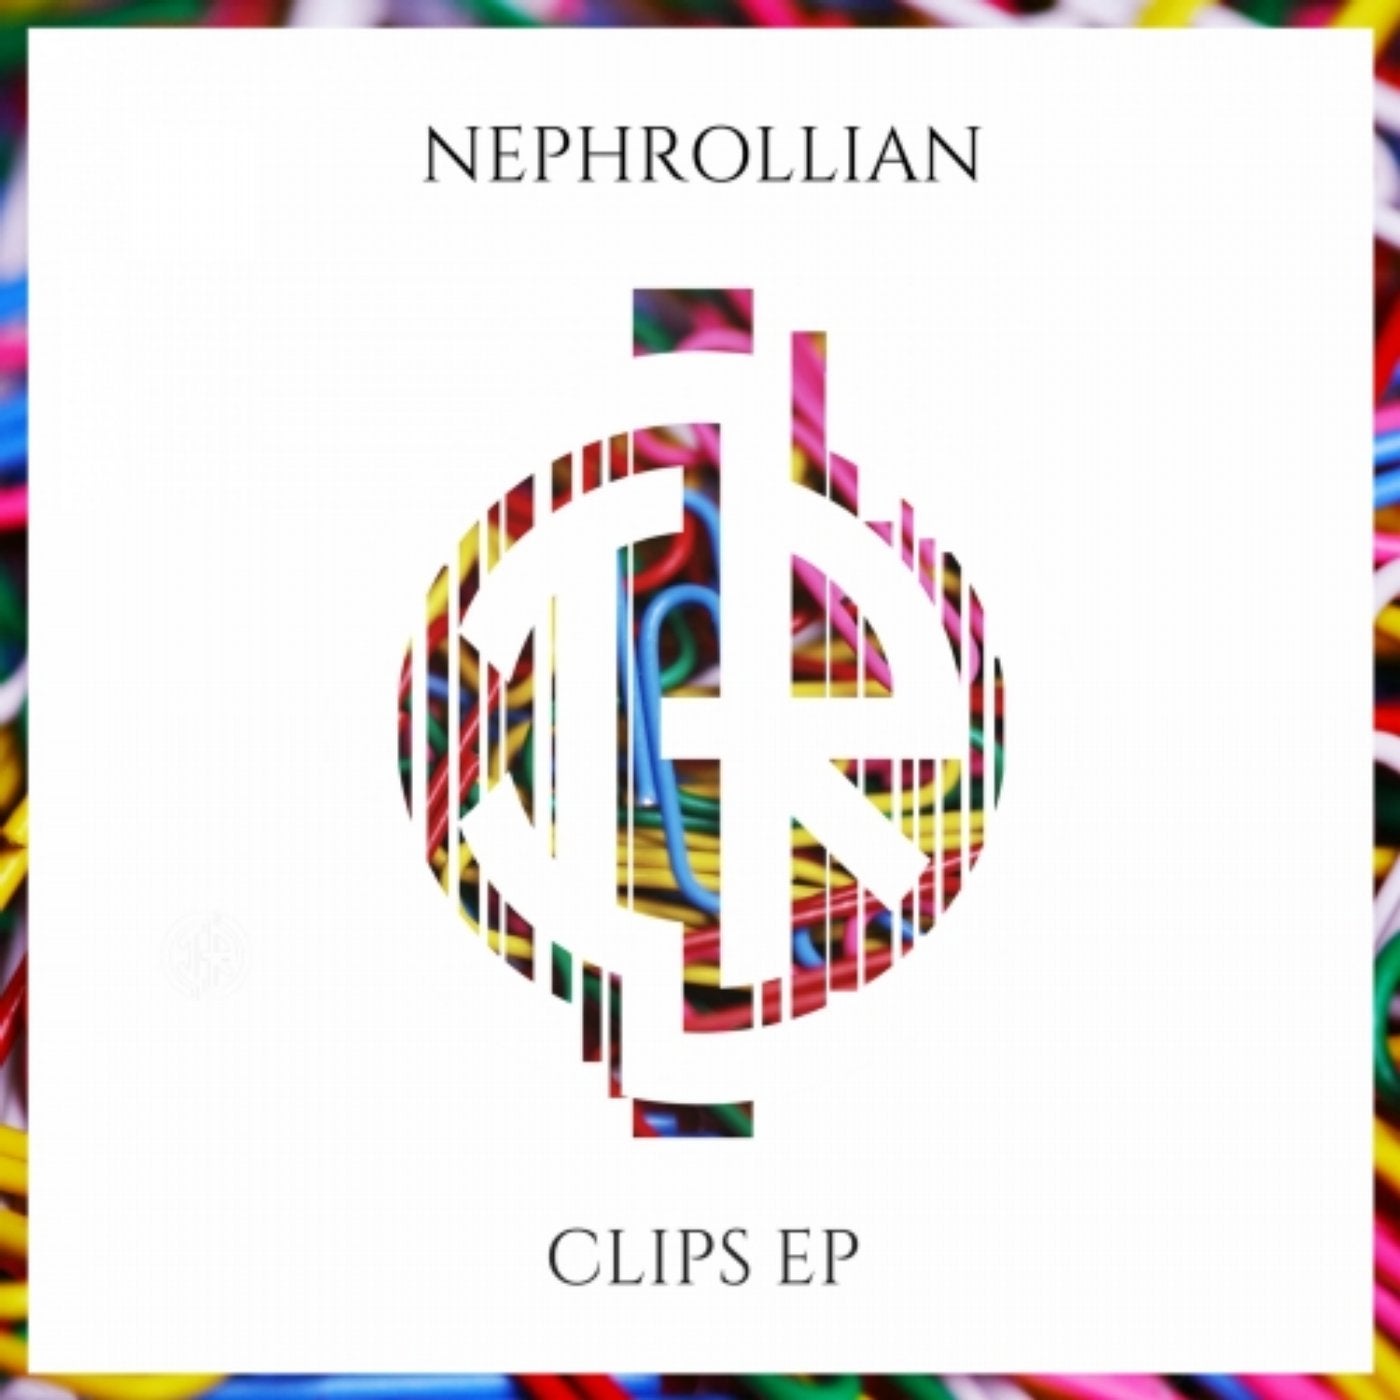 Clips EP